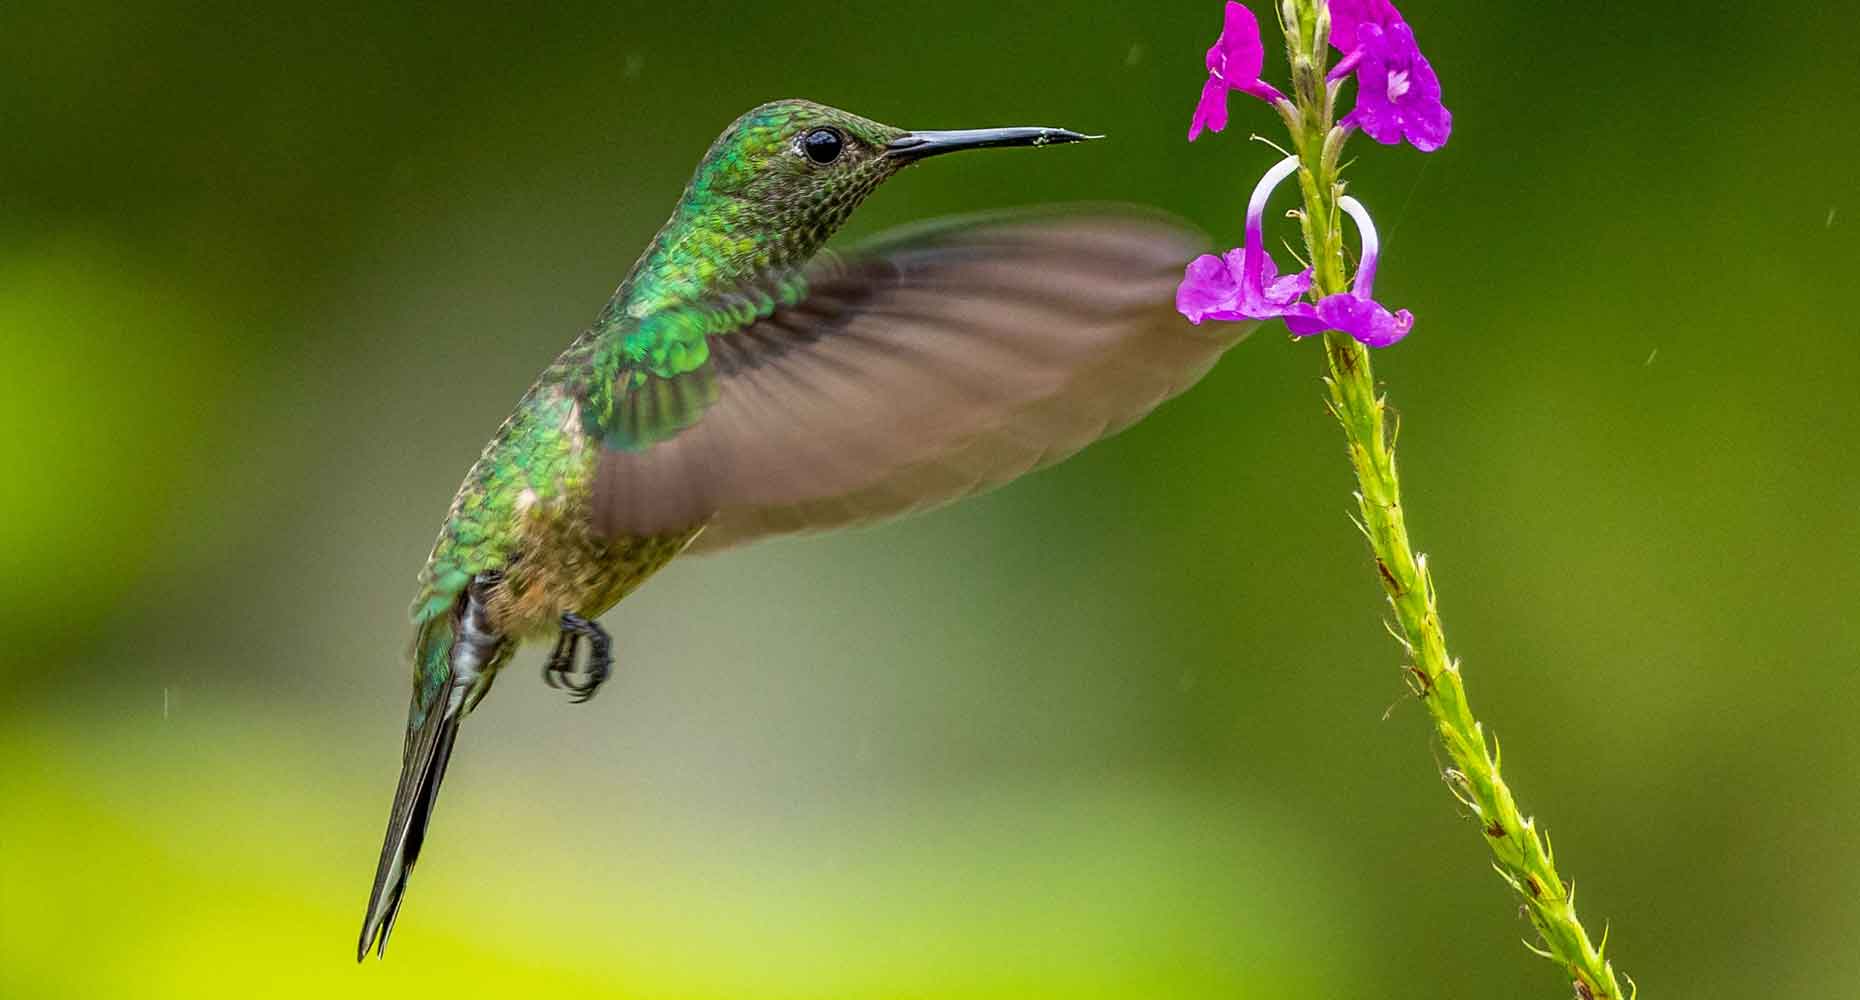 Hummingbird flapping its wings while feeding at a flower